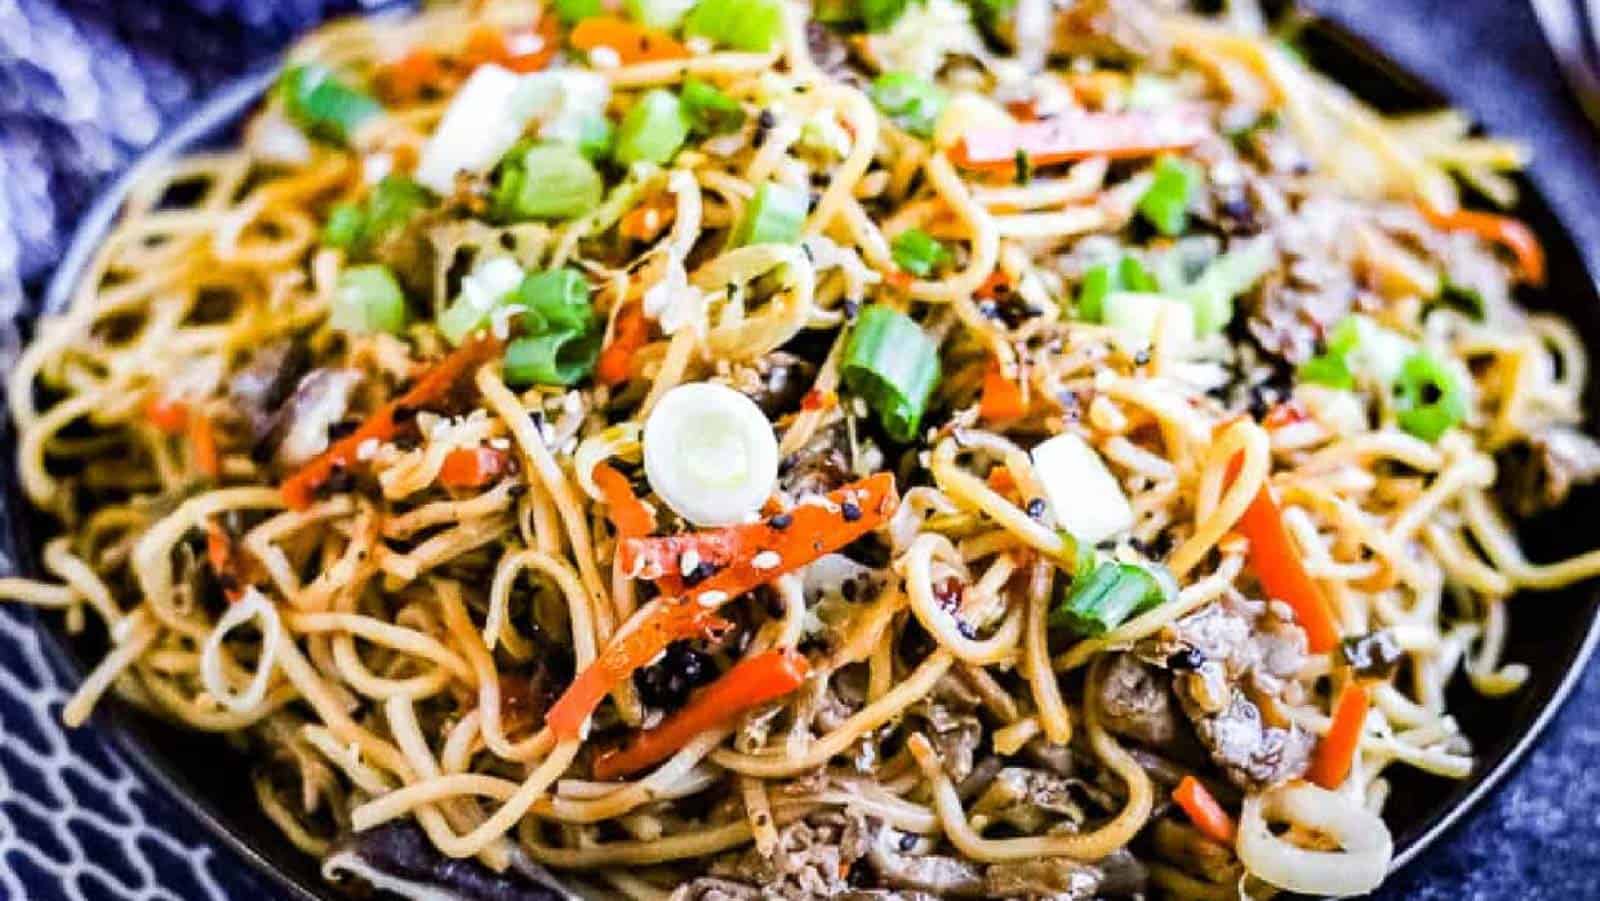 Beef yakisoba noodles with veggies and pickled ginger.